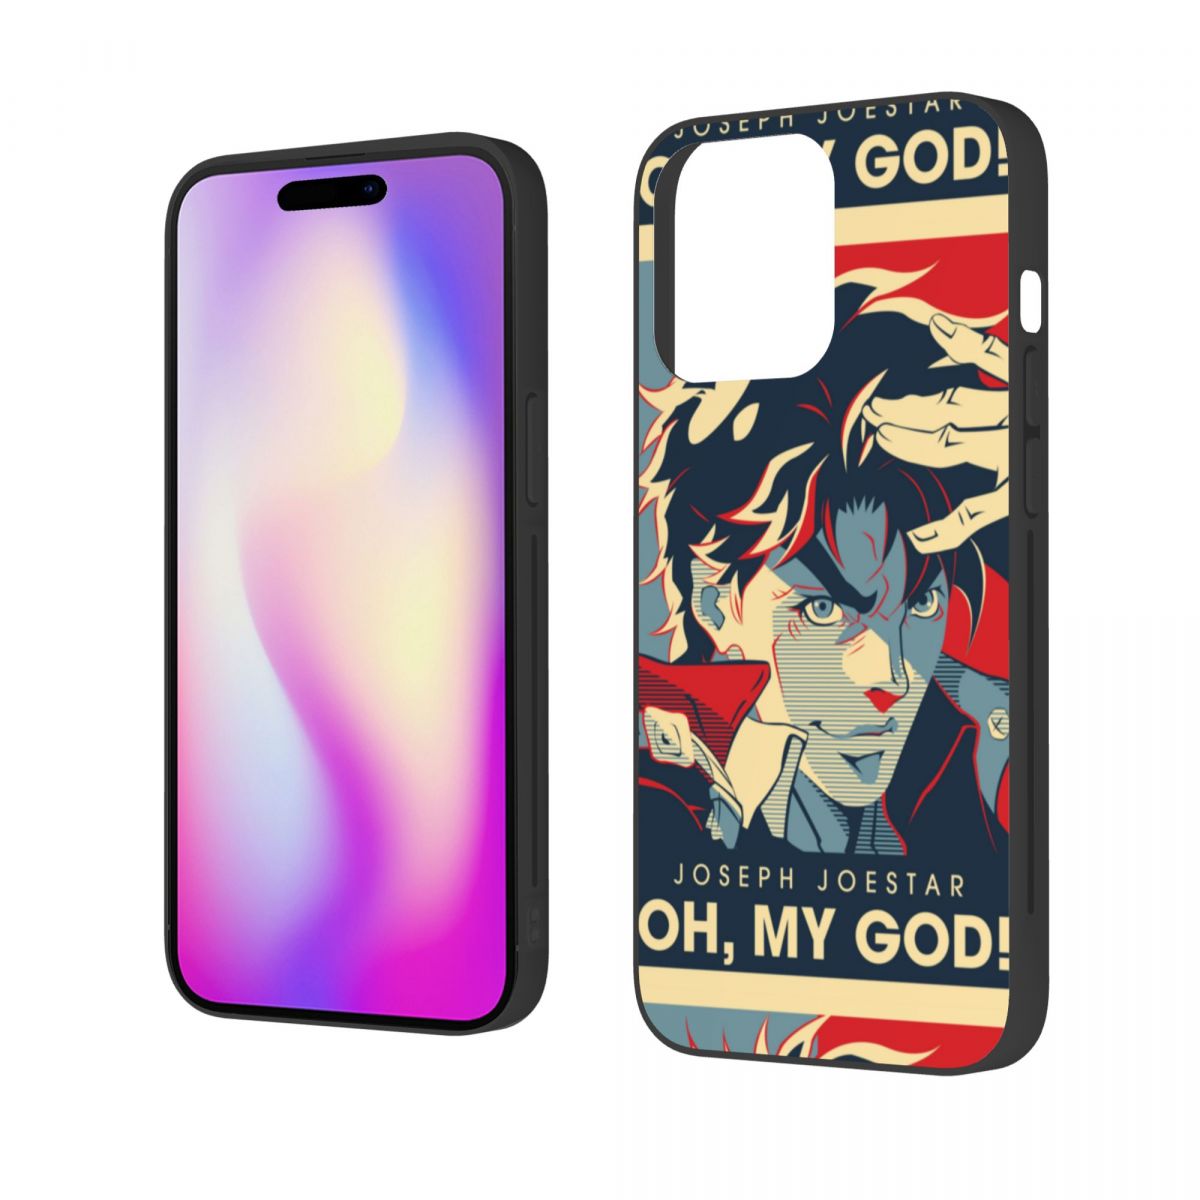 Ensure your devices is protected at all times! Get your iPhone case now! | Show of your love with our JoJo's Bizarre Adventure Anime iPhone case | If you are looking for more JoJo's Bizarre Adventure Merch , We have it all! | Check out all our Anime Merch now!